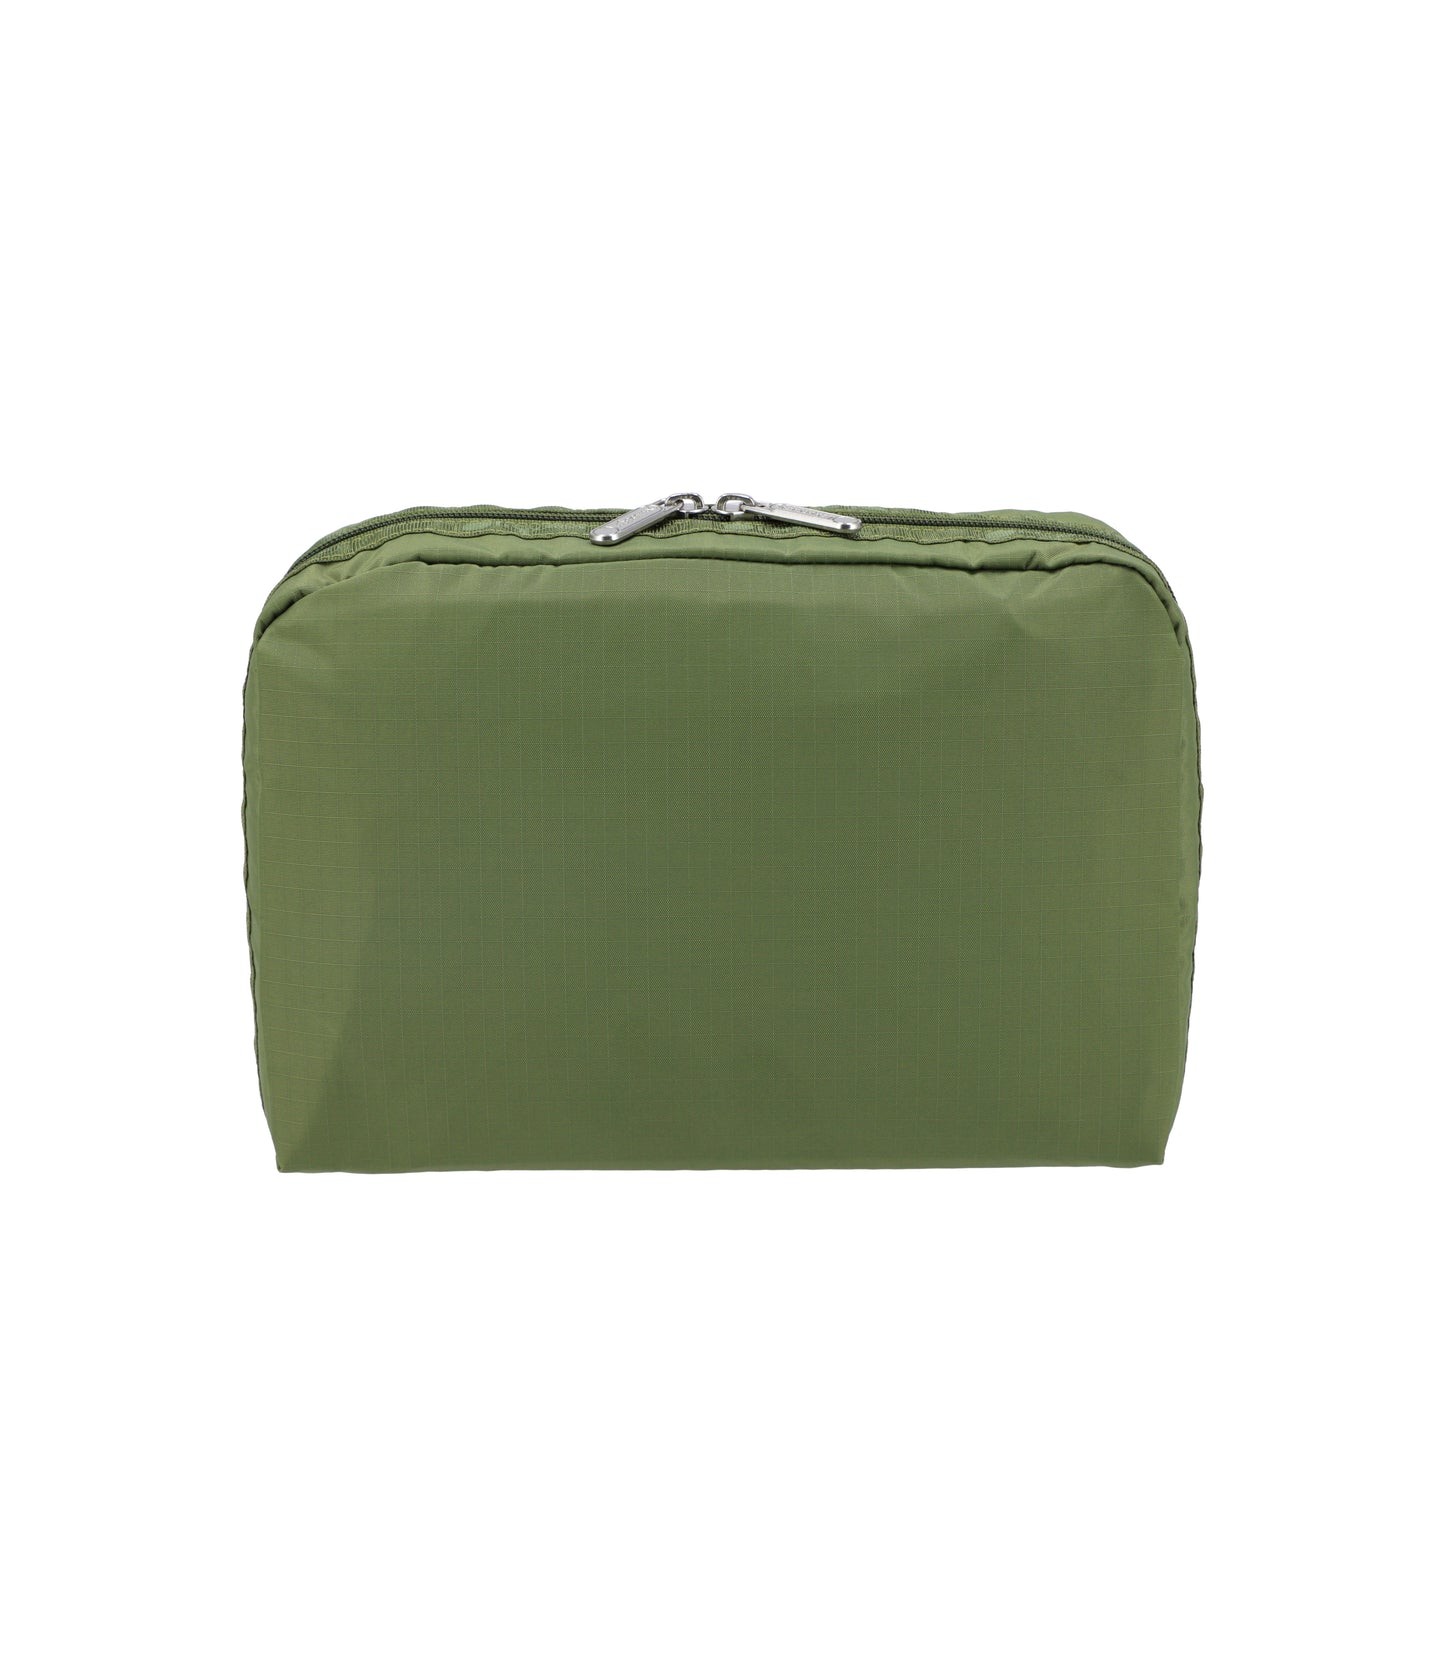 Extra Large Rectangular Cosmetic<br>Olive